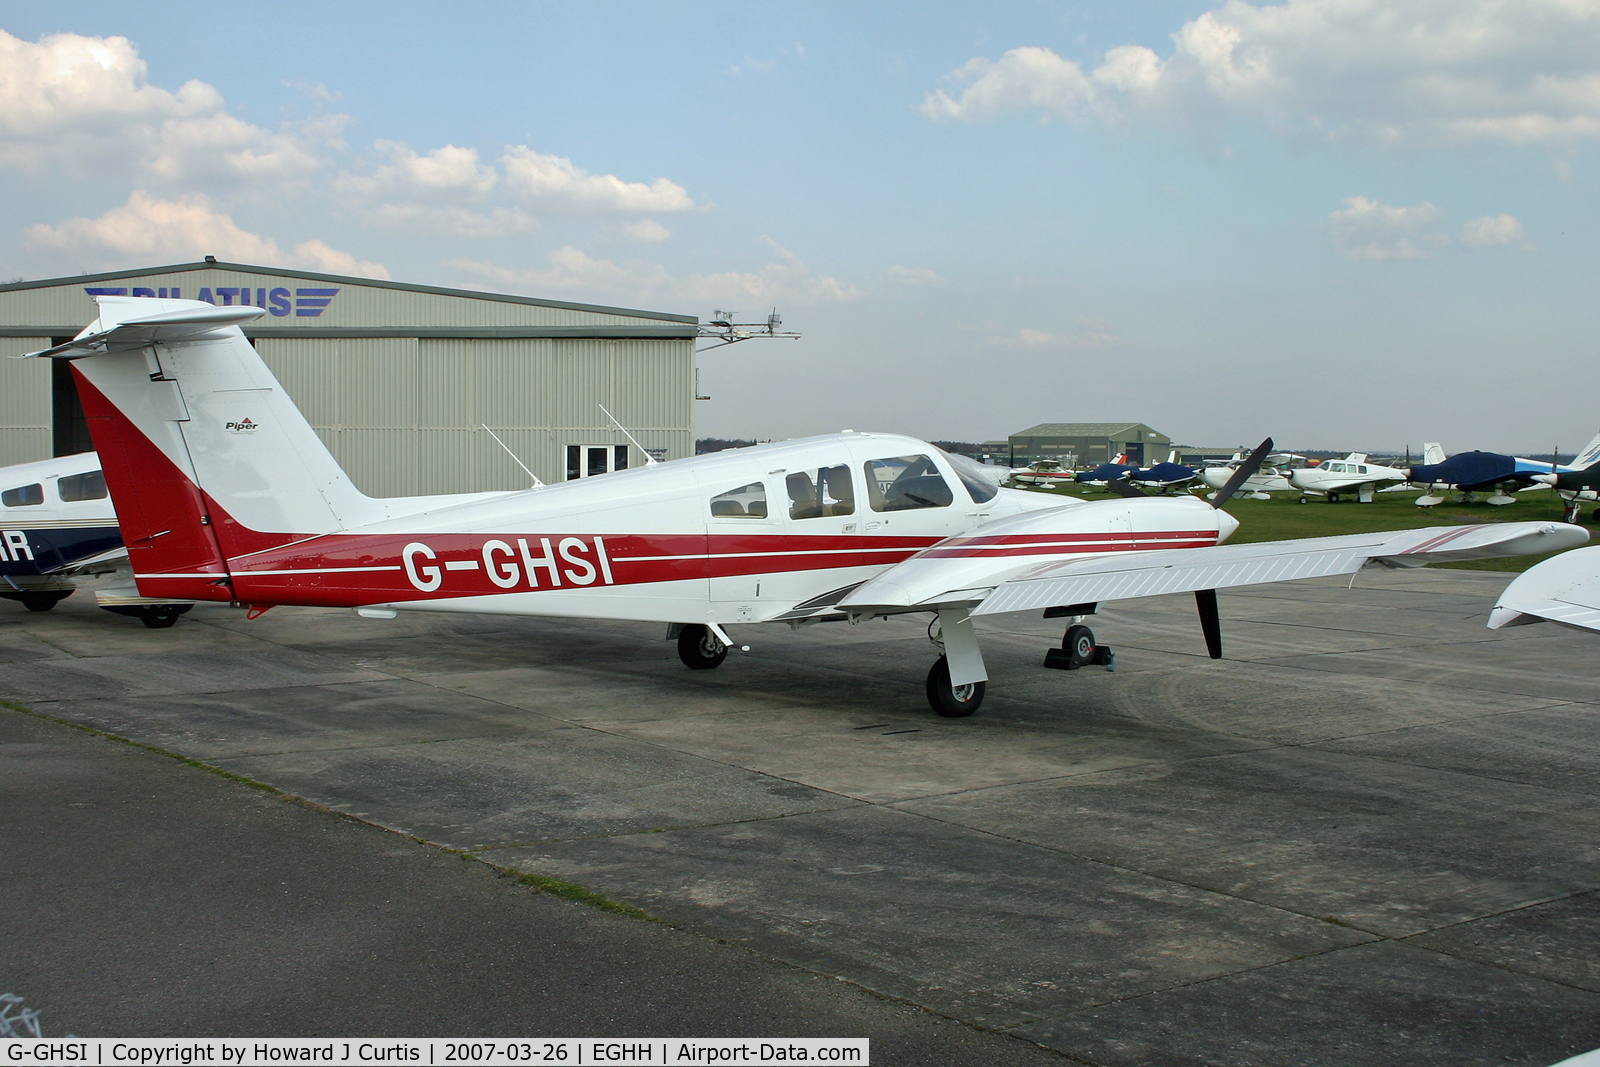 G-GHSI, 1981 Piper PA-44-180T Turbo Seminole C/N 44-8107026, Privately owned.